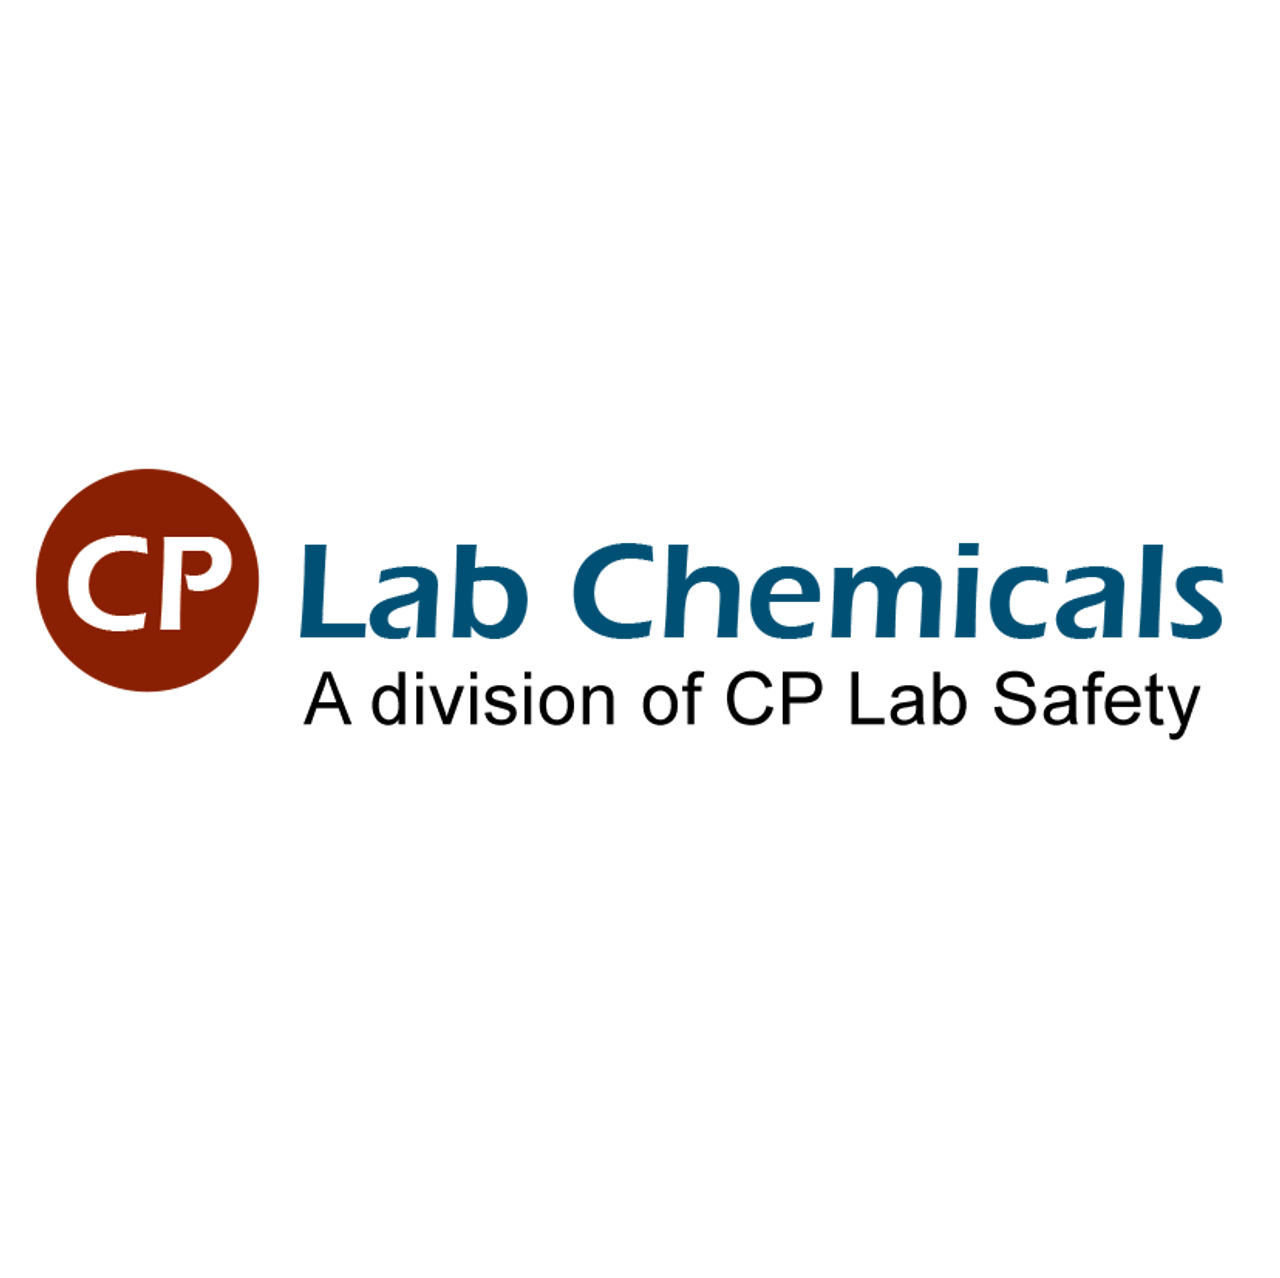 https://cdn11.bigcommerce.com/s-3yvzqa/images/stencil/1280x1280/products/139313/214851/CP-Lab-Chemicals-Logo-square__09140.1650482487.png?c=2